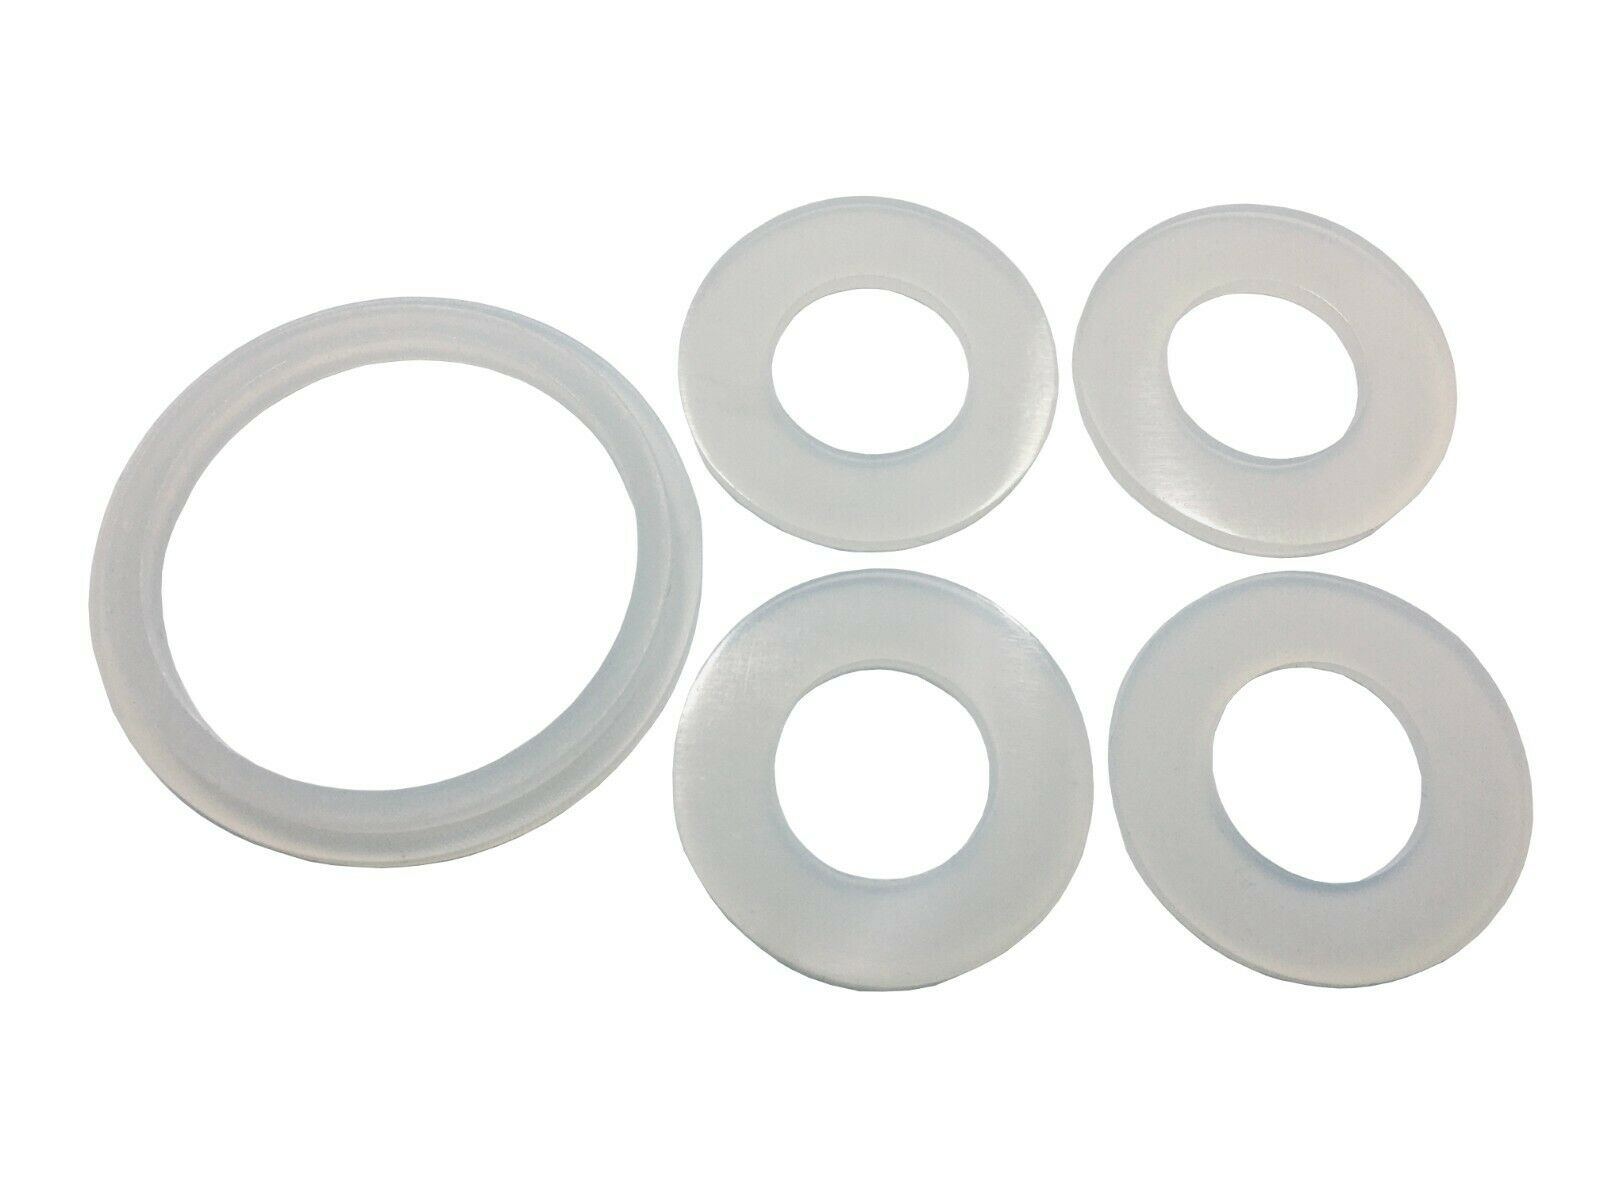 Connector Seals Gaskets Washers For Bestway Coleman Saluspa Lay-z-spa, A And B/c